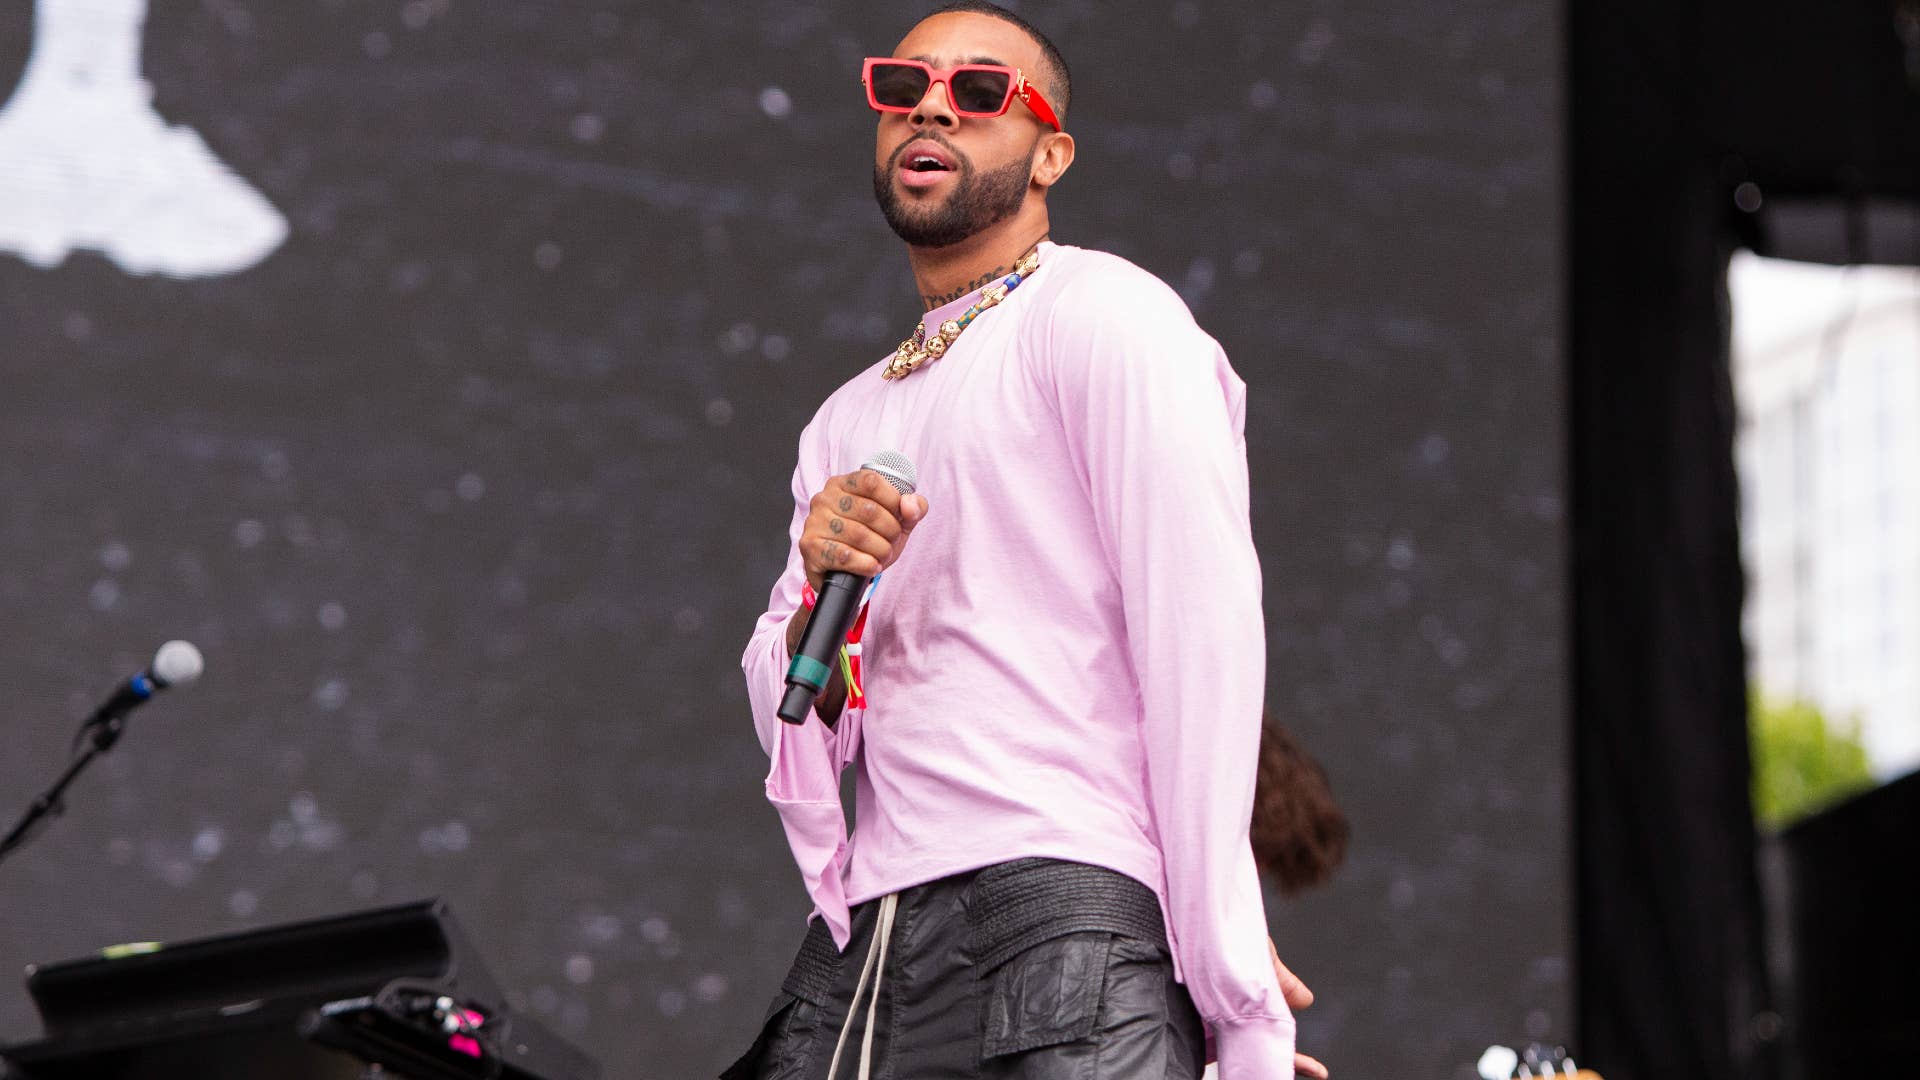 Vic Mensa is pictured performing at a festival